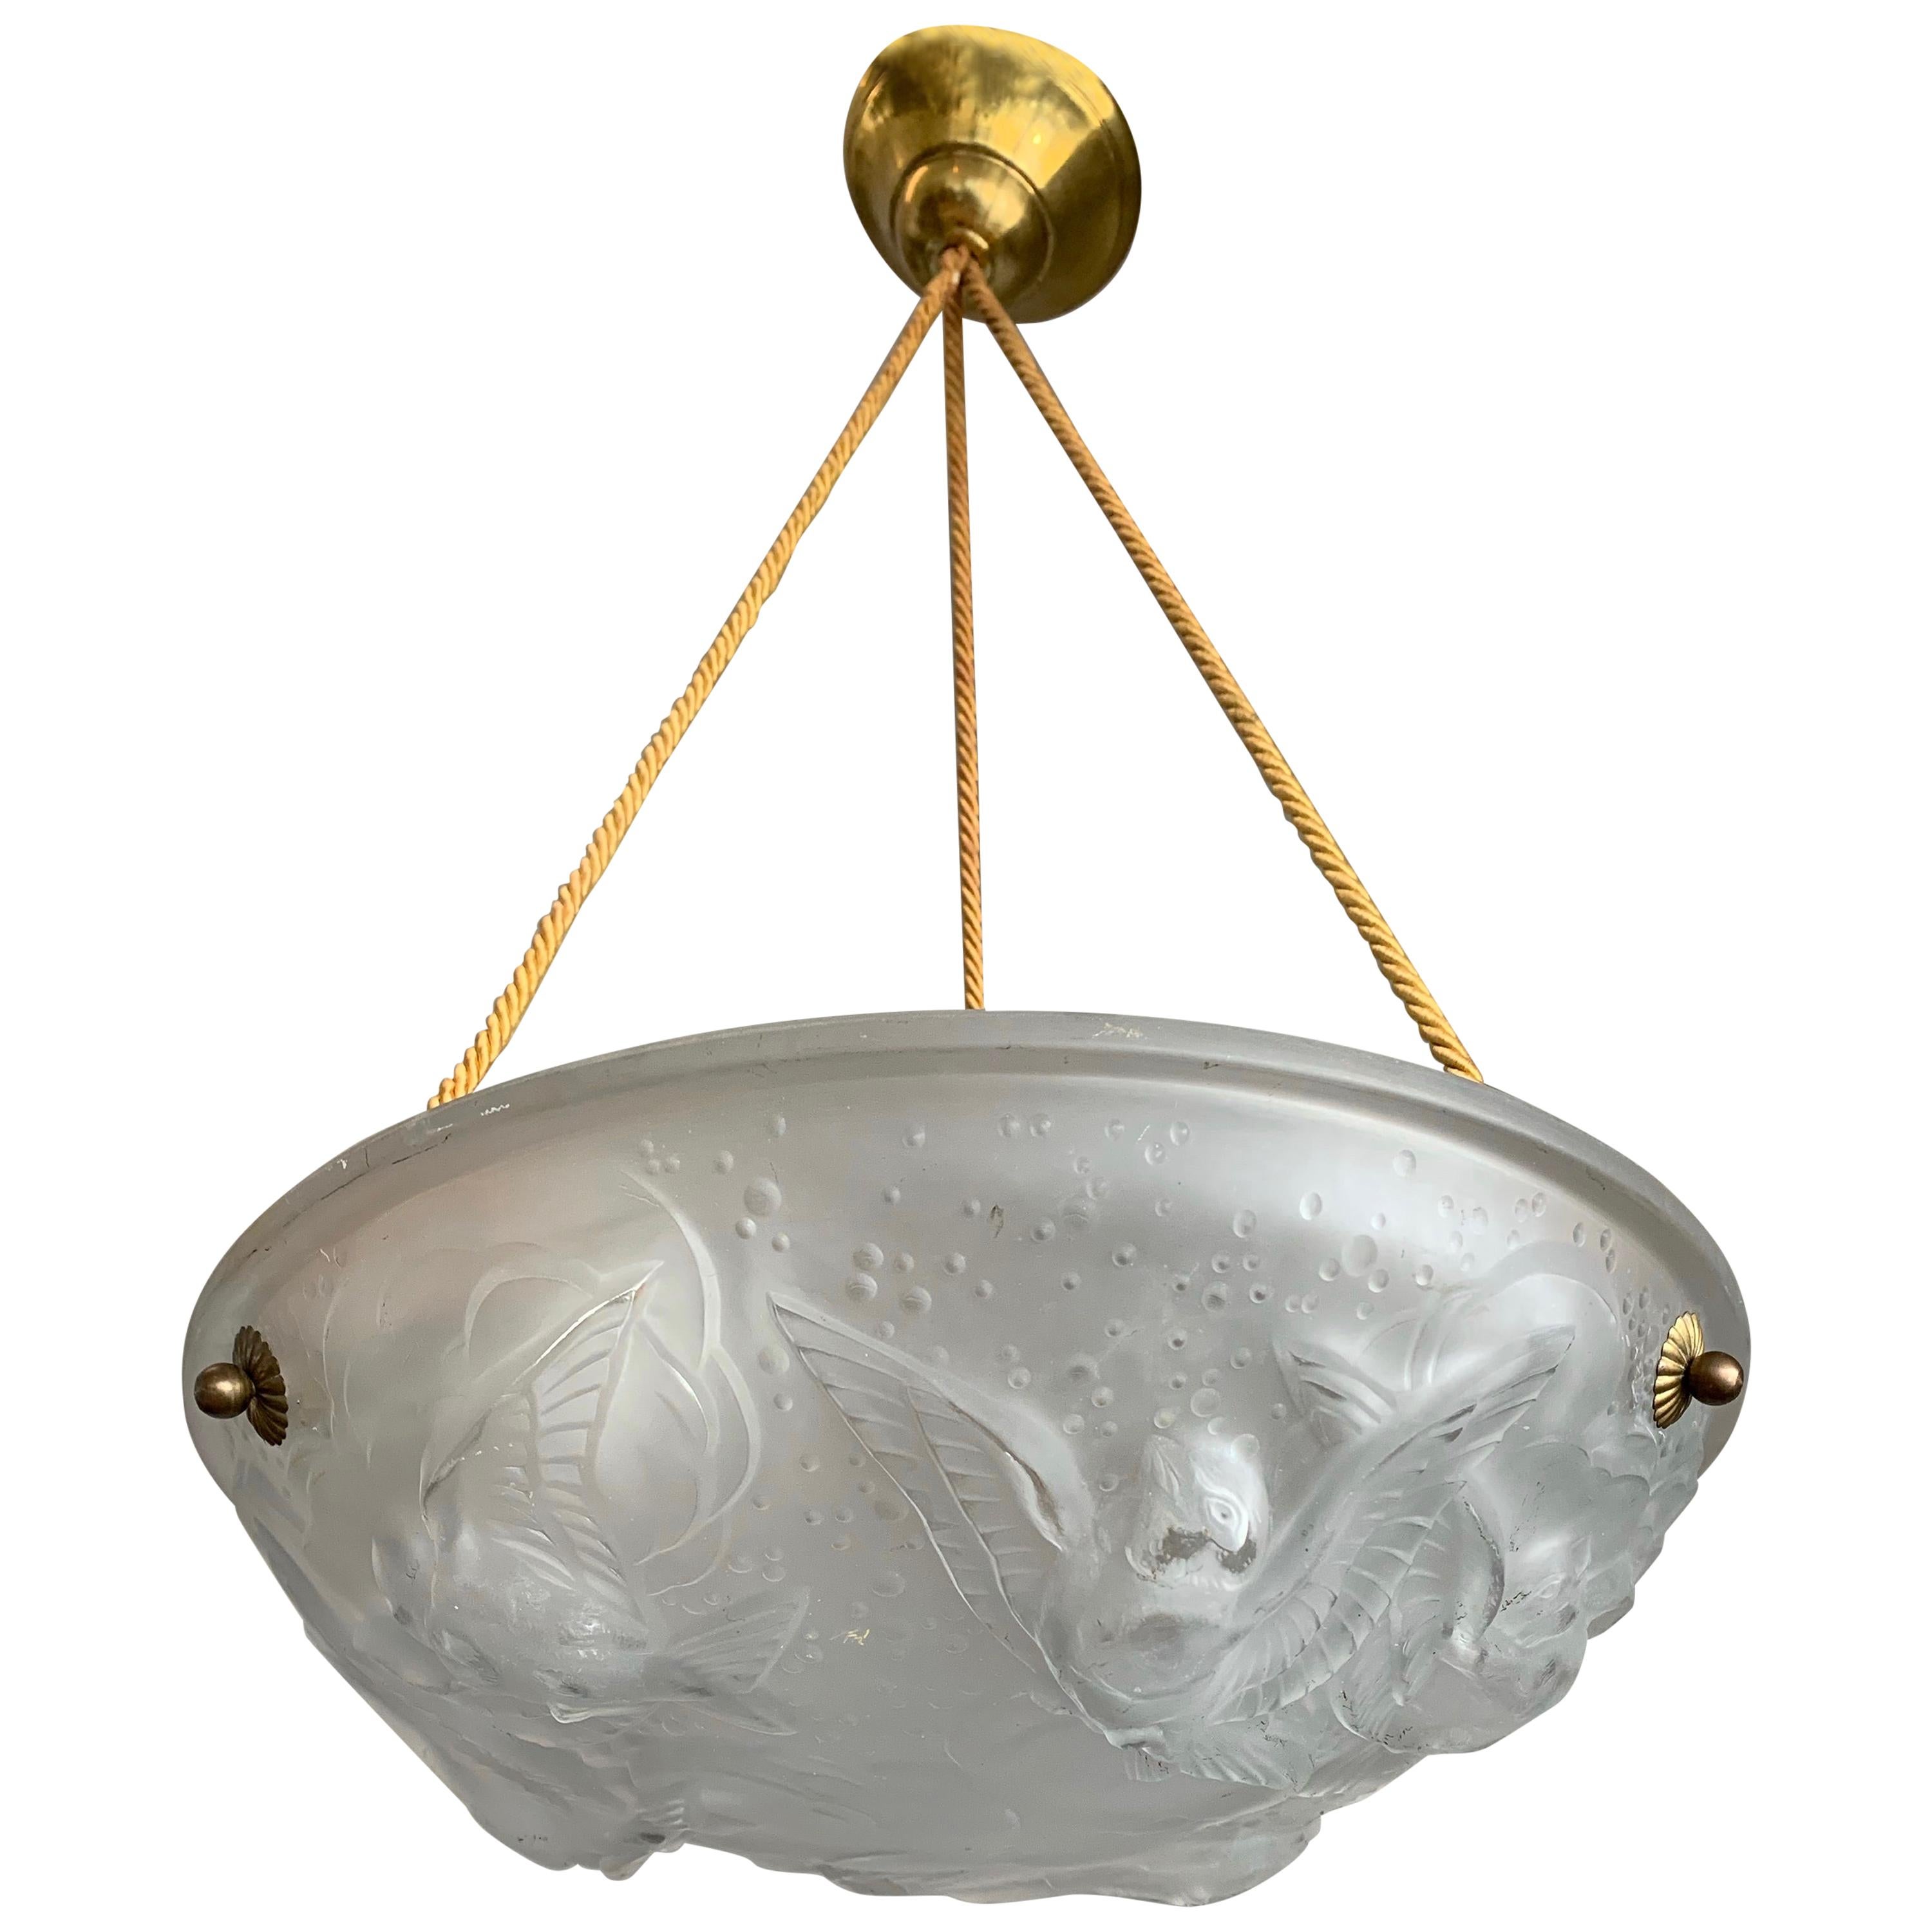 Stylish Art Deco Chandelier, Frosted Glass with Flying House Sparrows by Muller For Sale